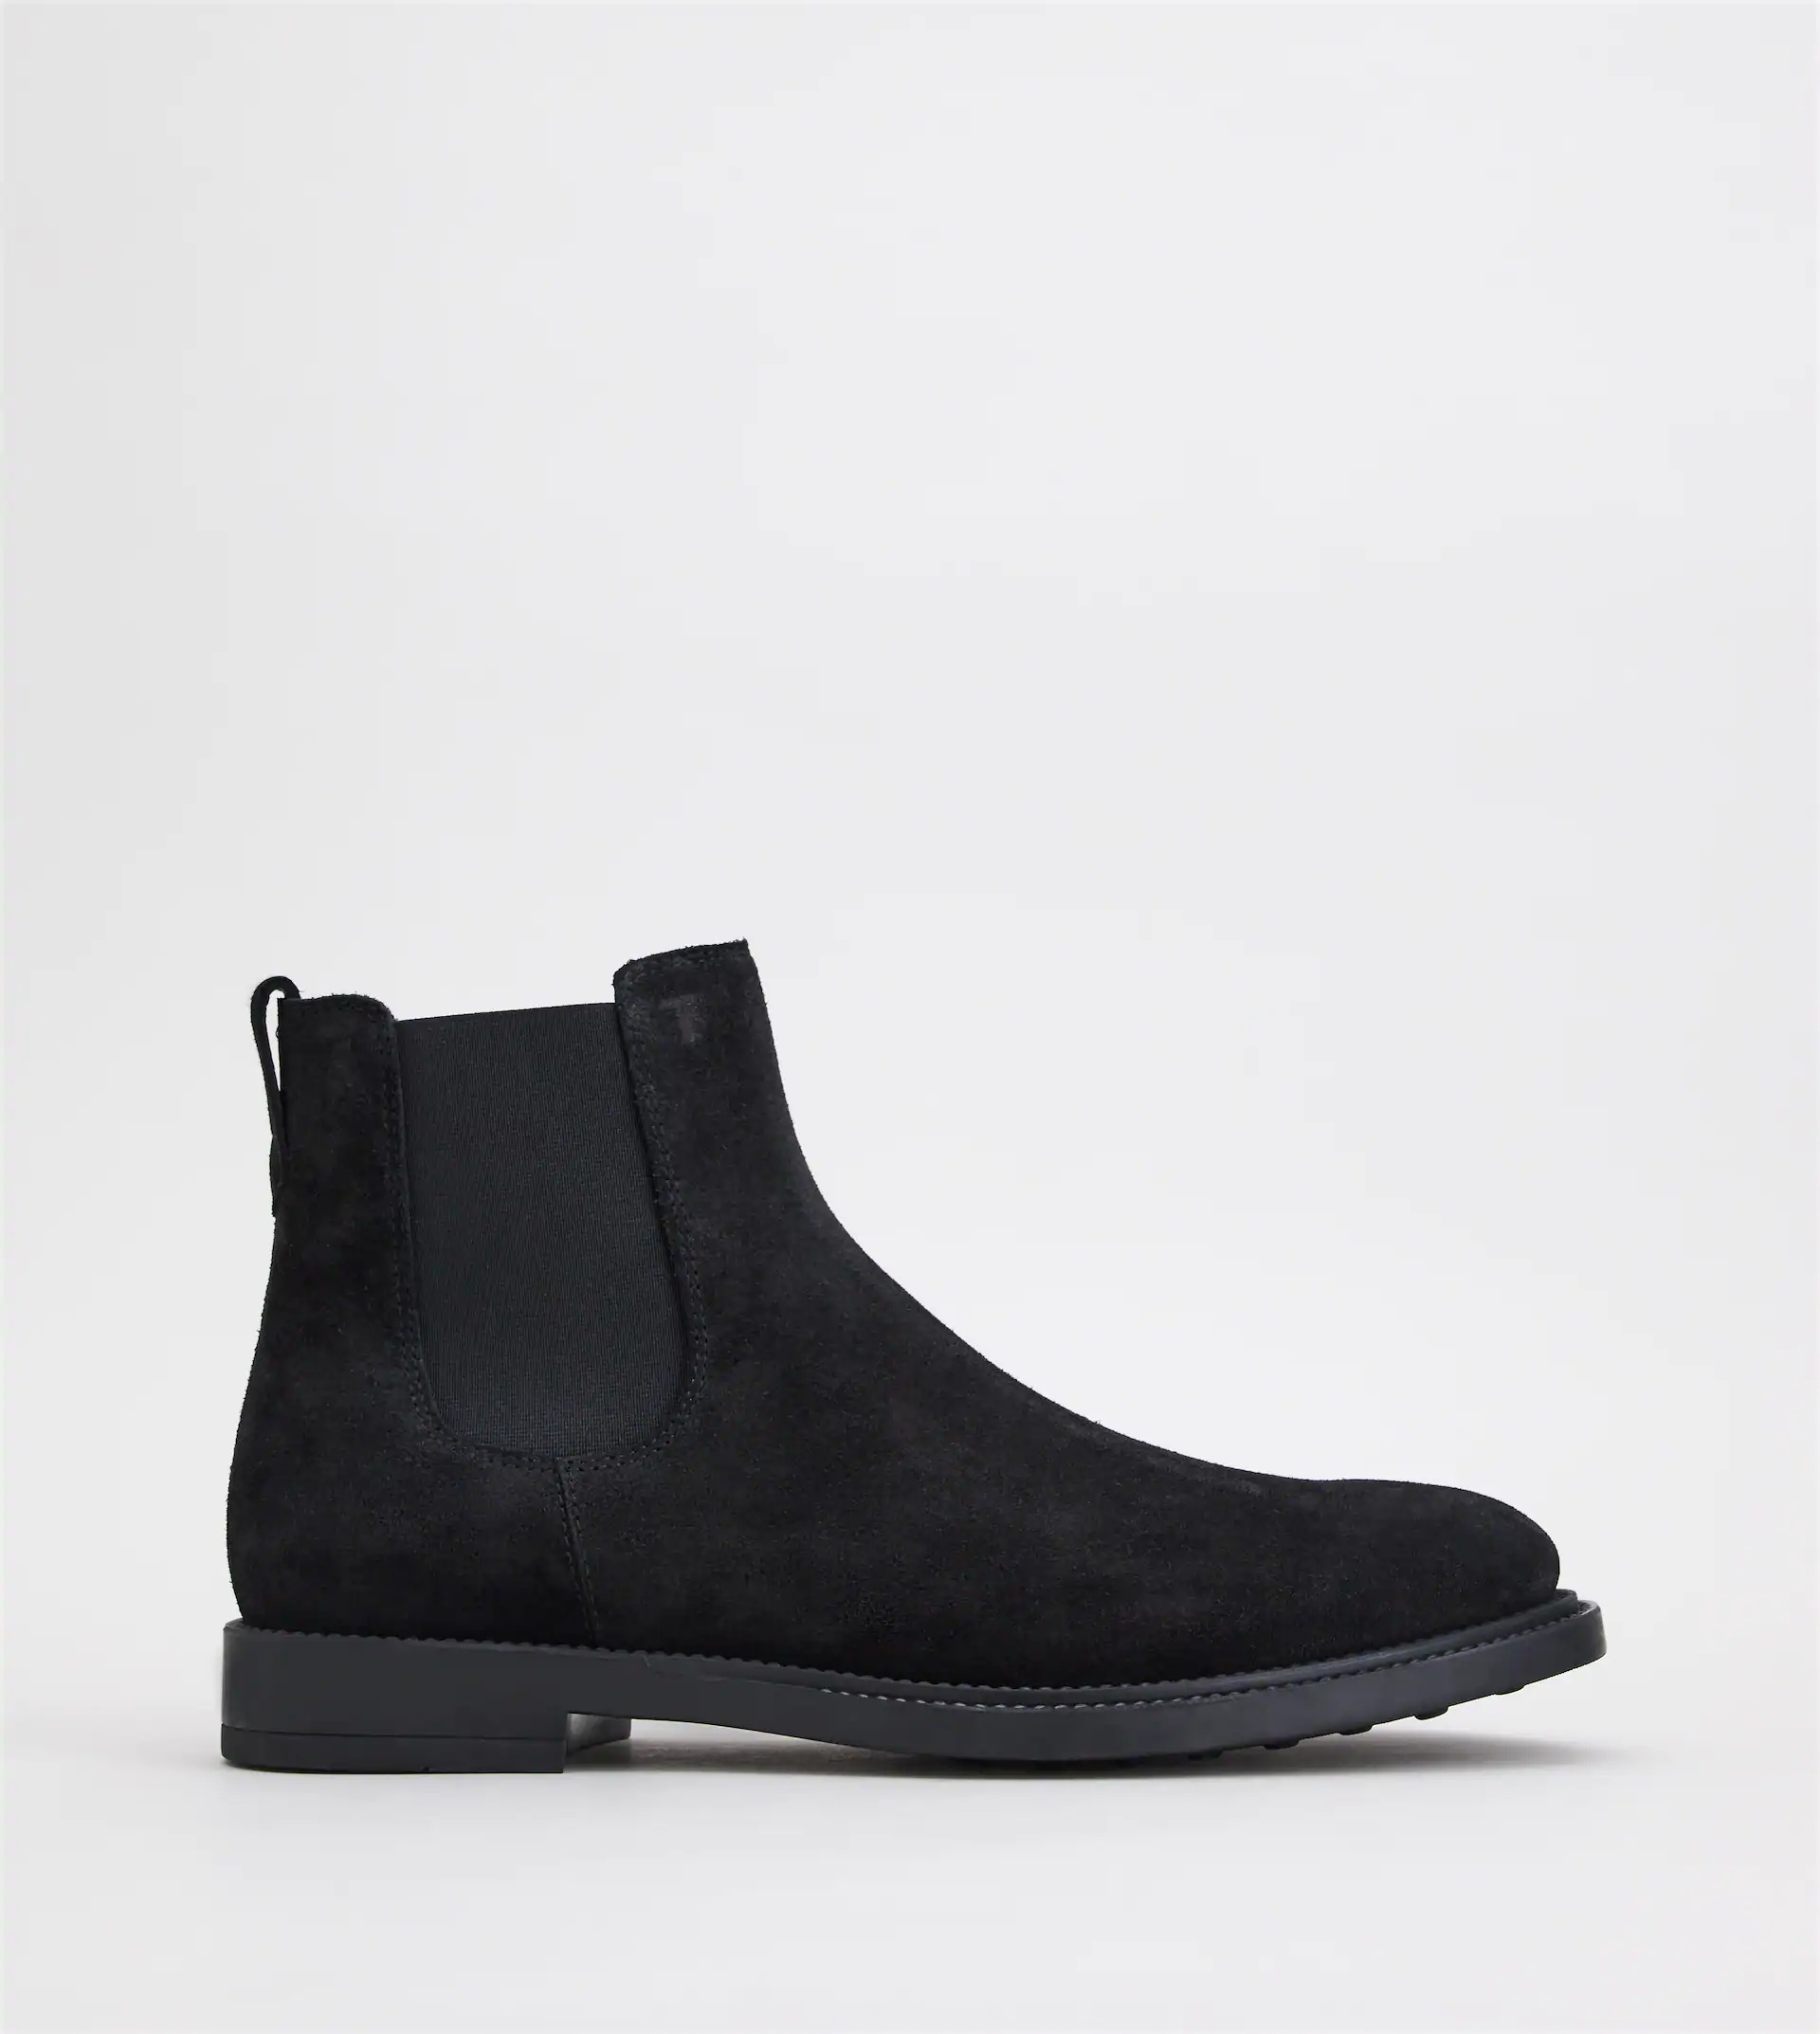 ANKLE BOOTS IN SUEDE - BLACK - 1